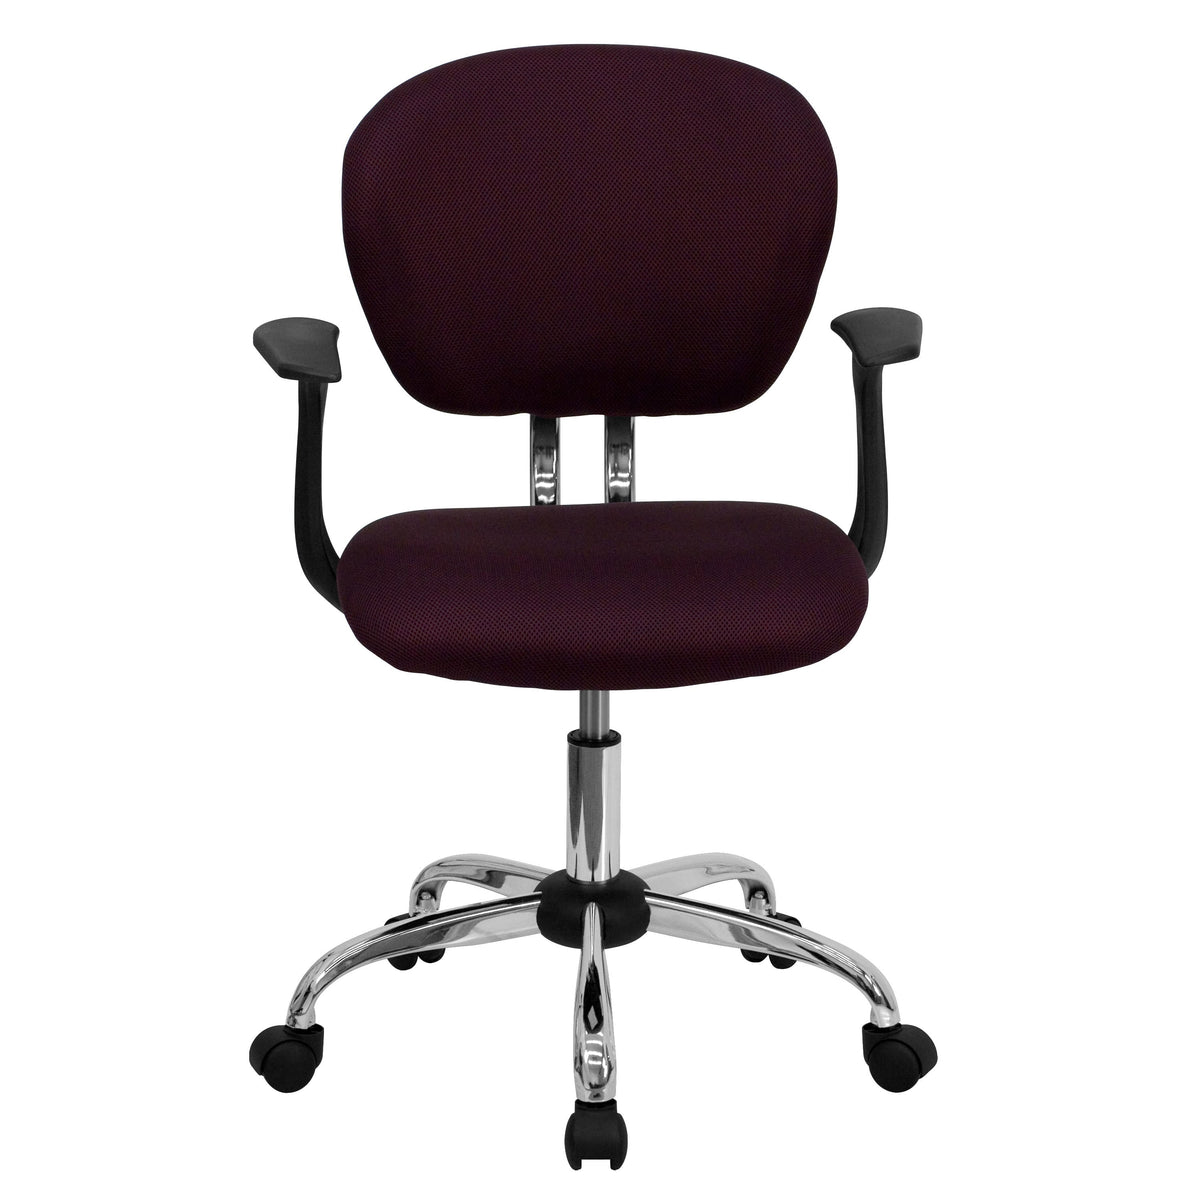 Burgundy |#| Mid-Back Burgundy Mesh Padded Swivel Task Office Chair with Chrome Base and Arms